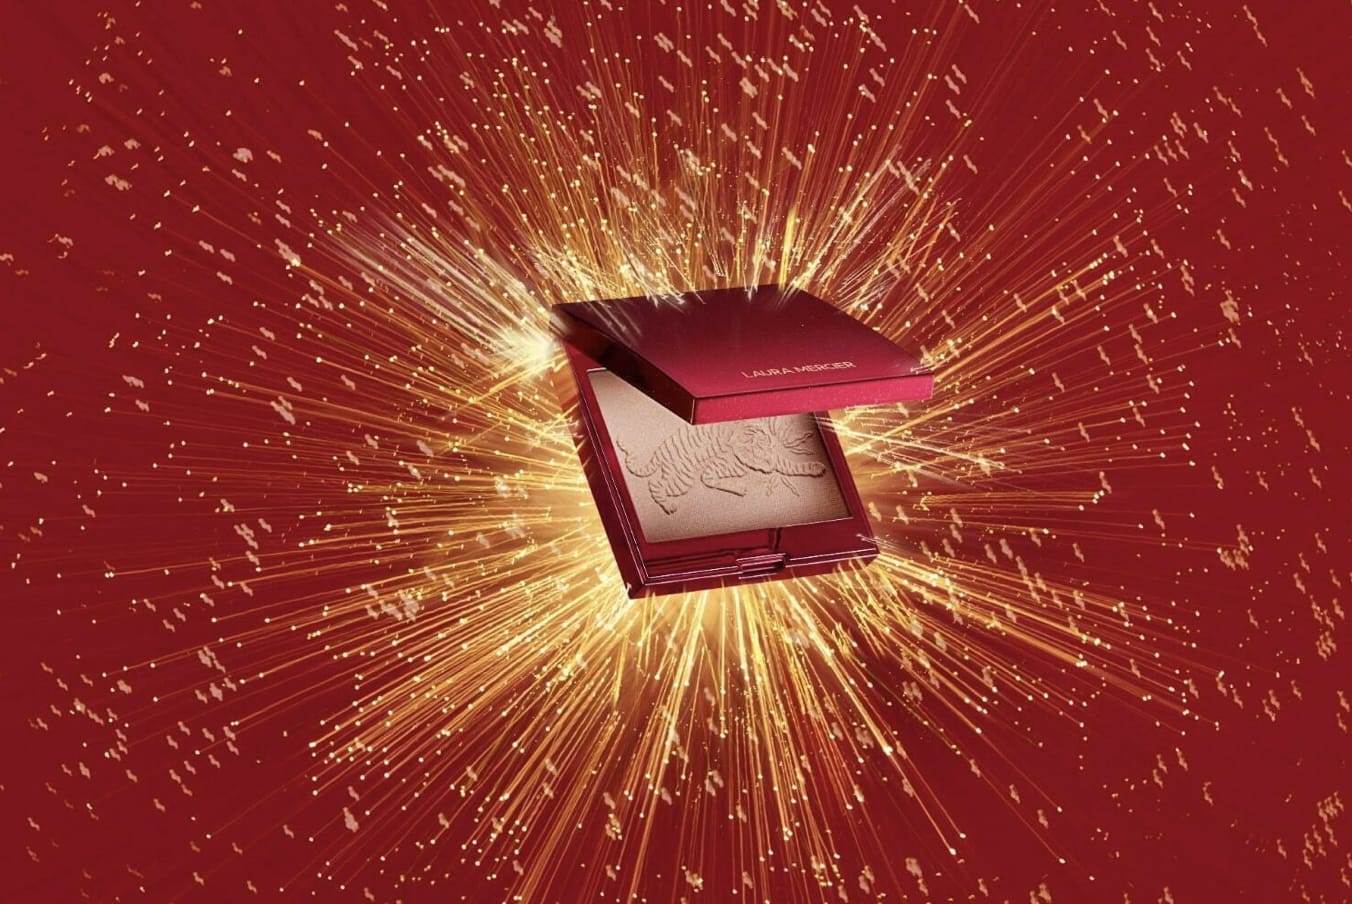 Laura Mercier collection nouvel an chinois 2022